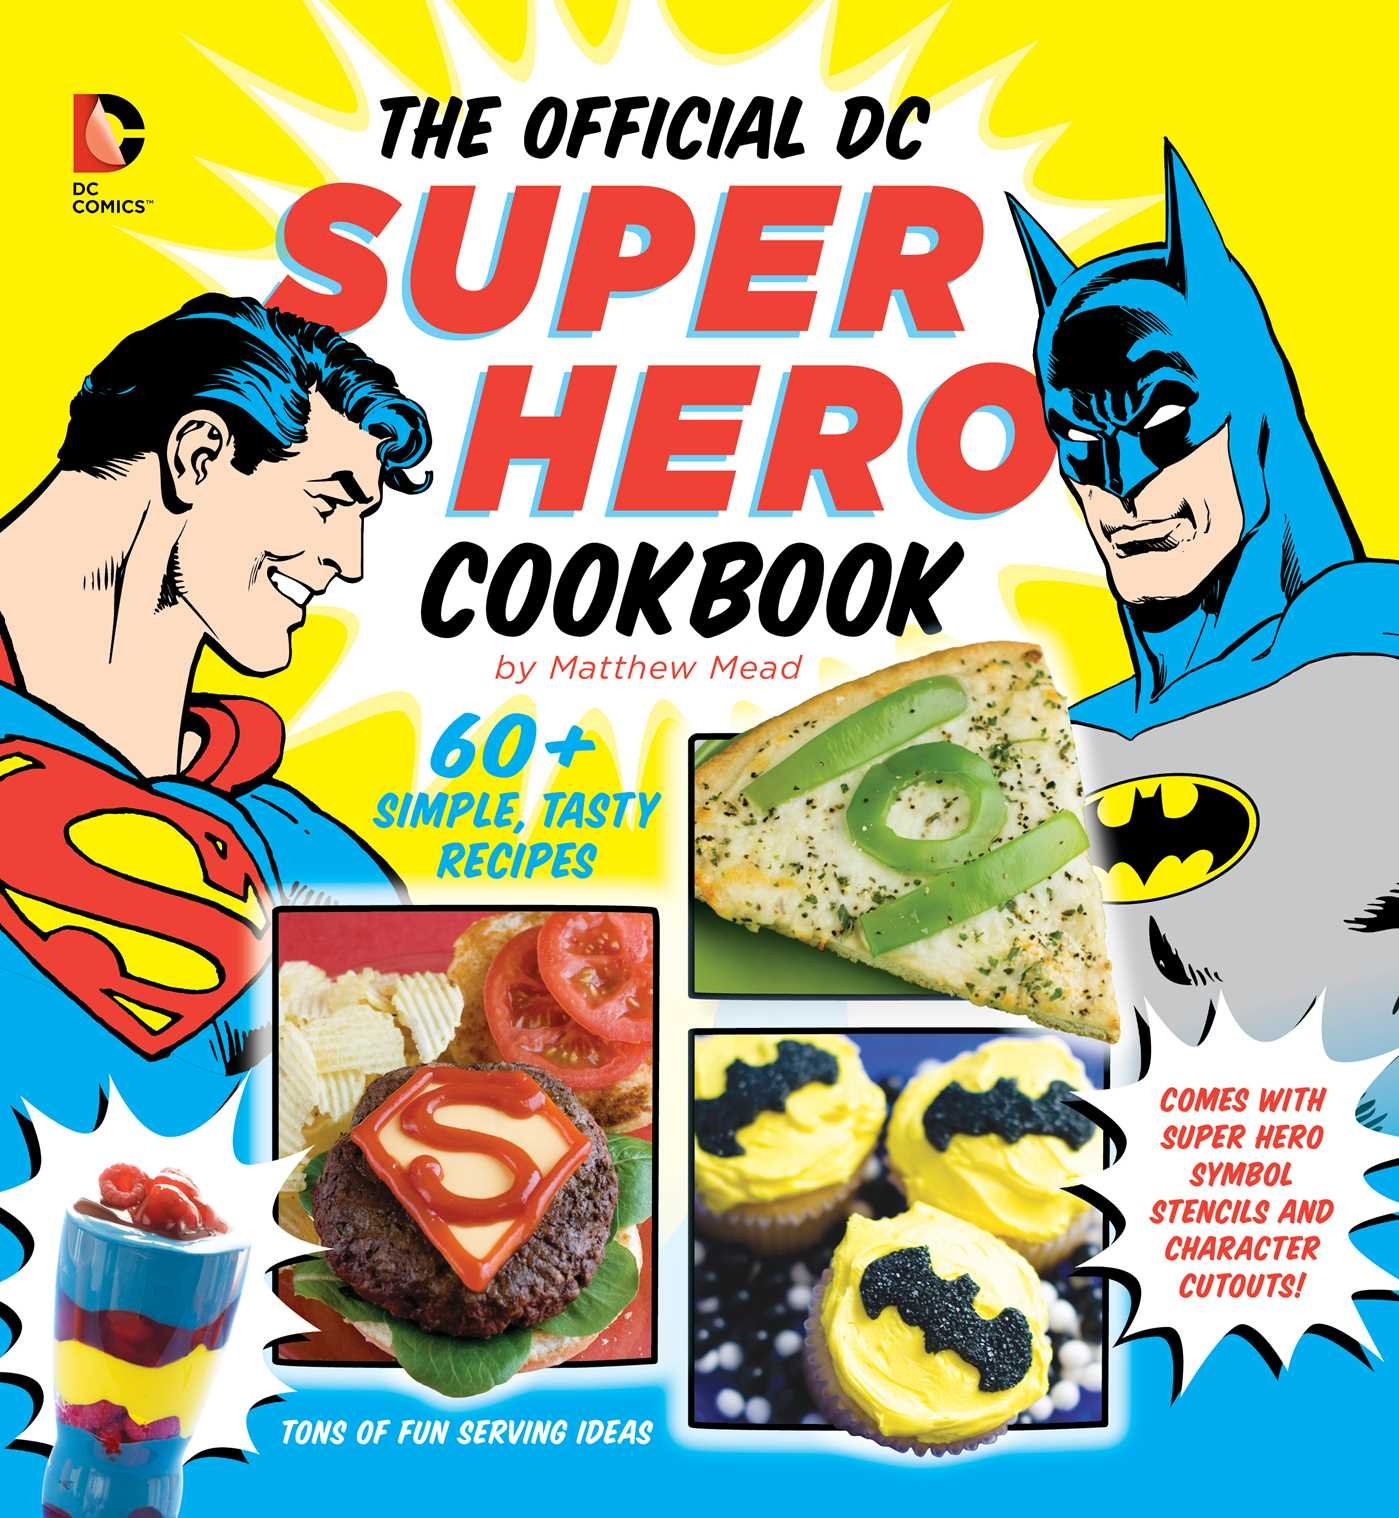 'The Official DC Super Hero Cookbook' features some cute ideas, but is not very challenging